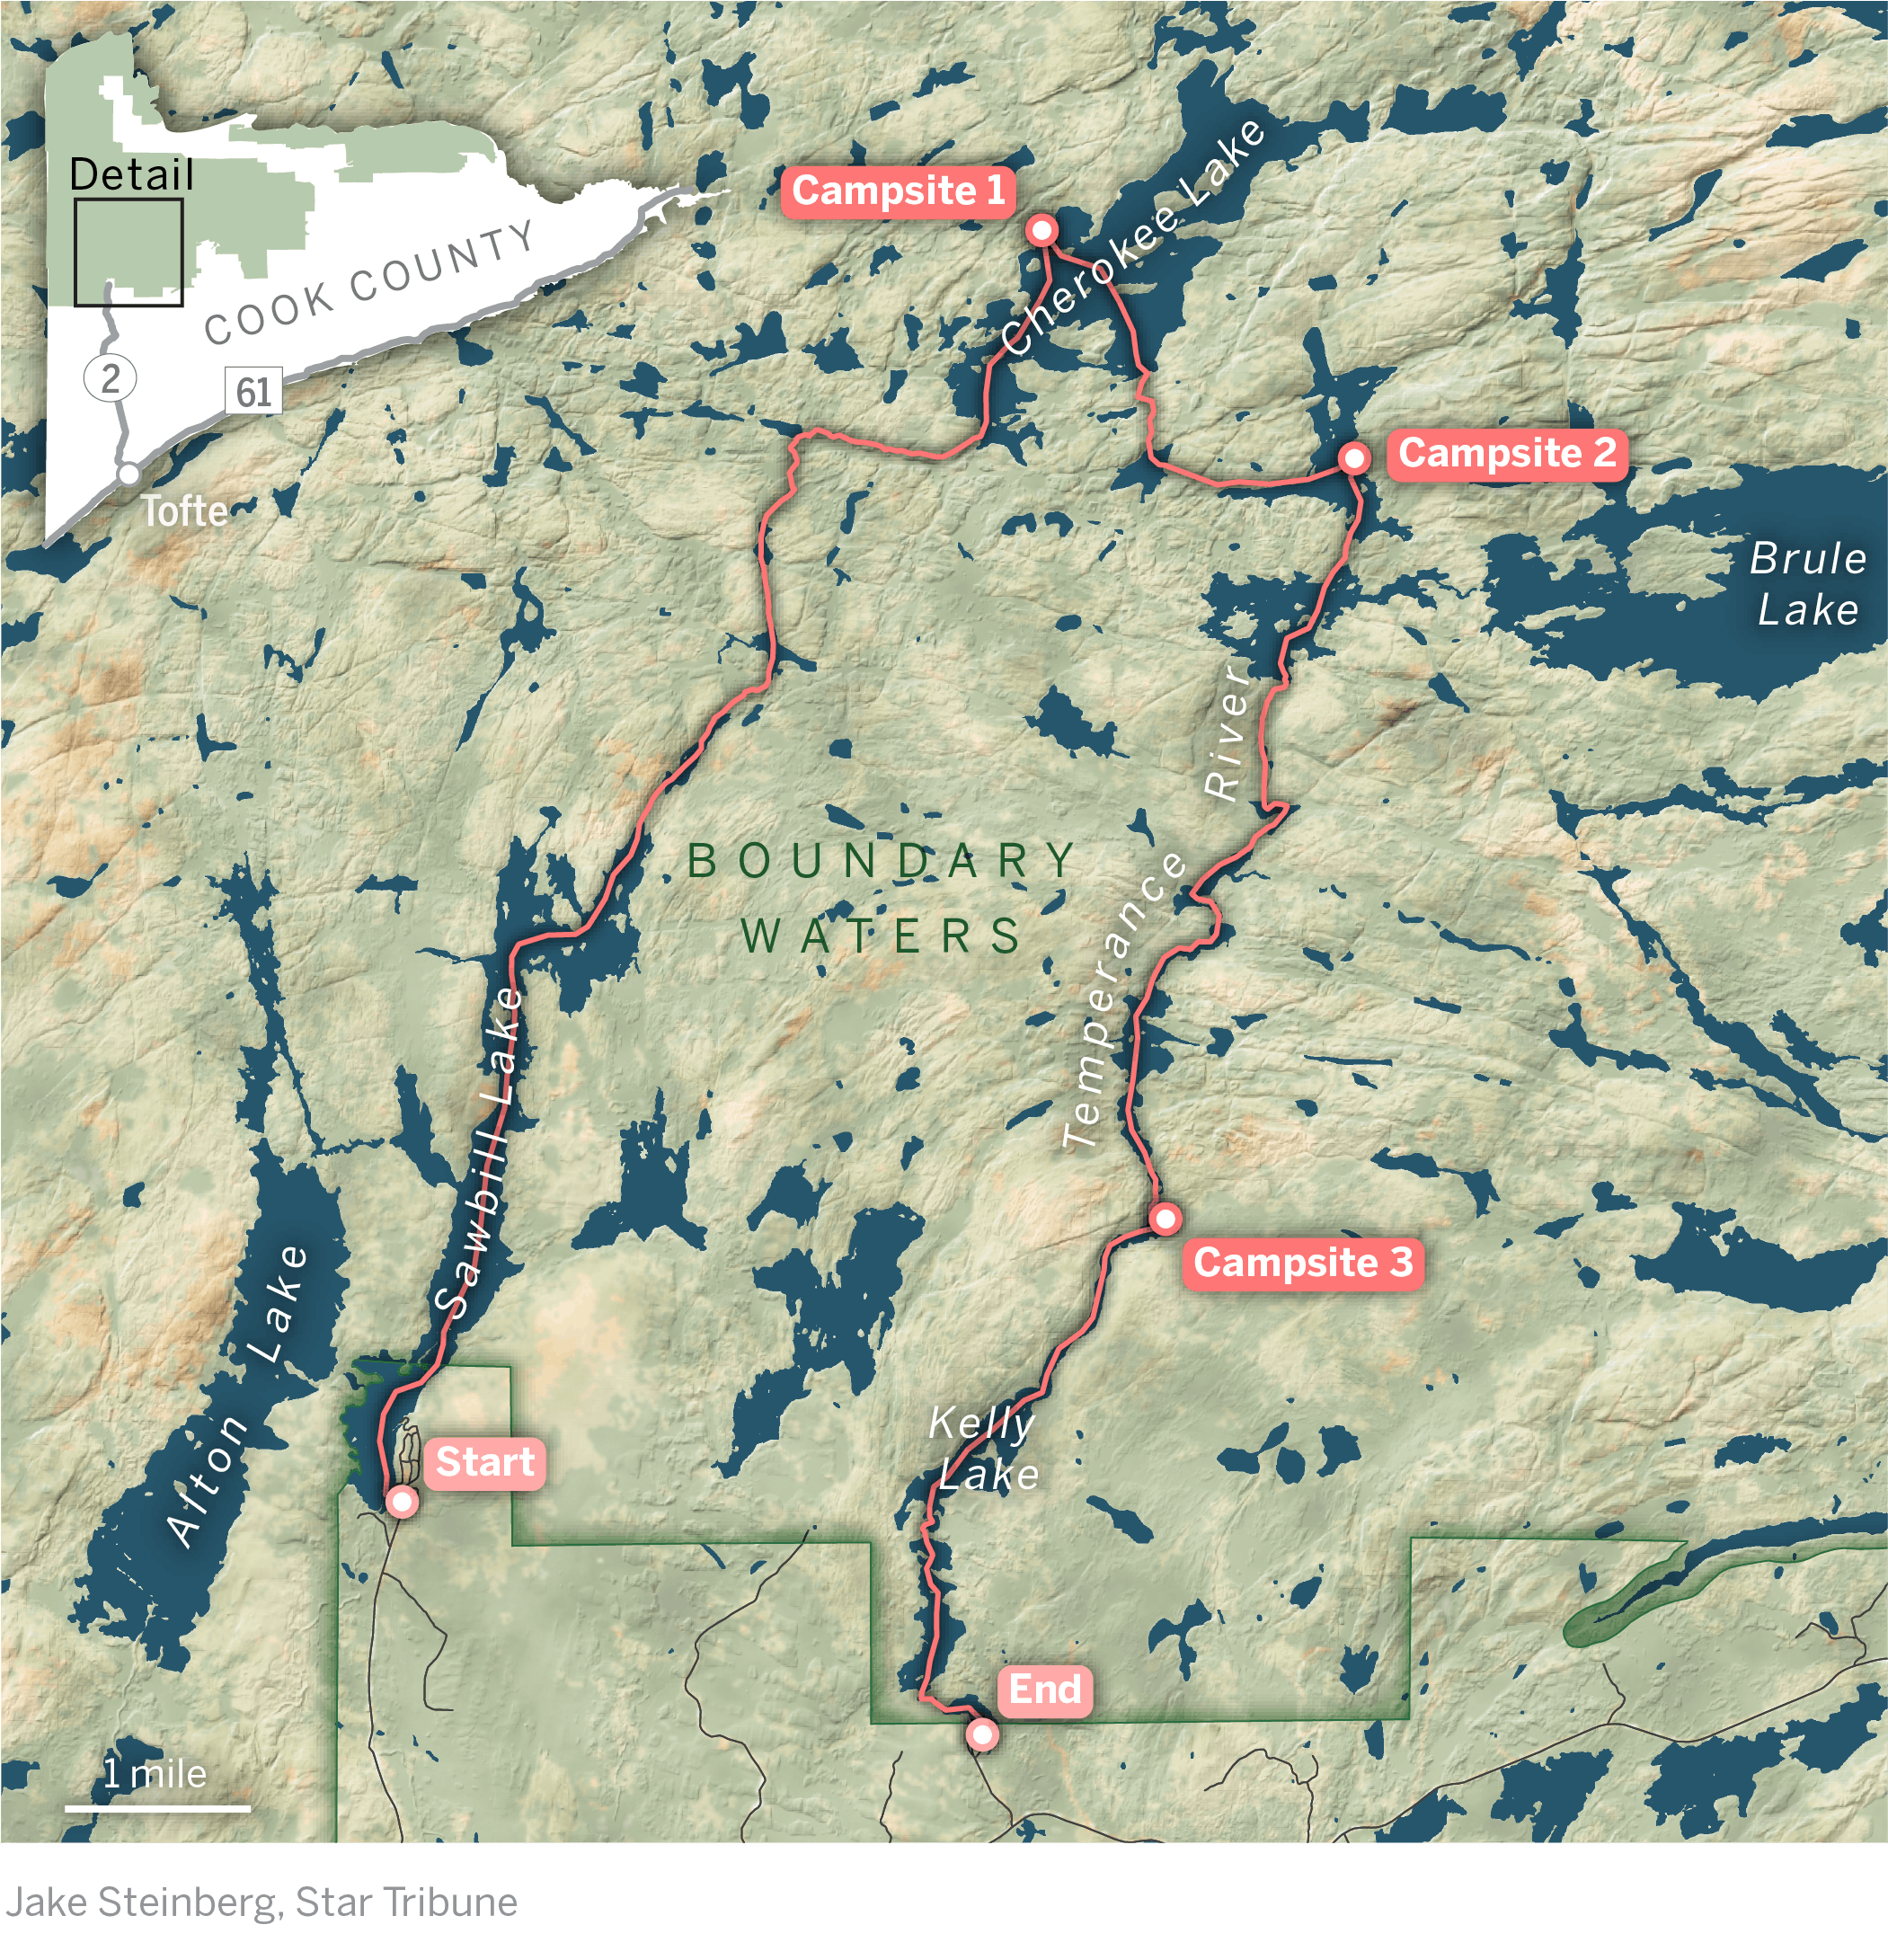 A map of a route in the Boundary Waters.